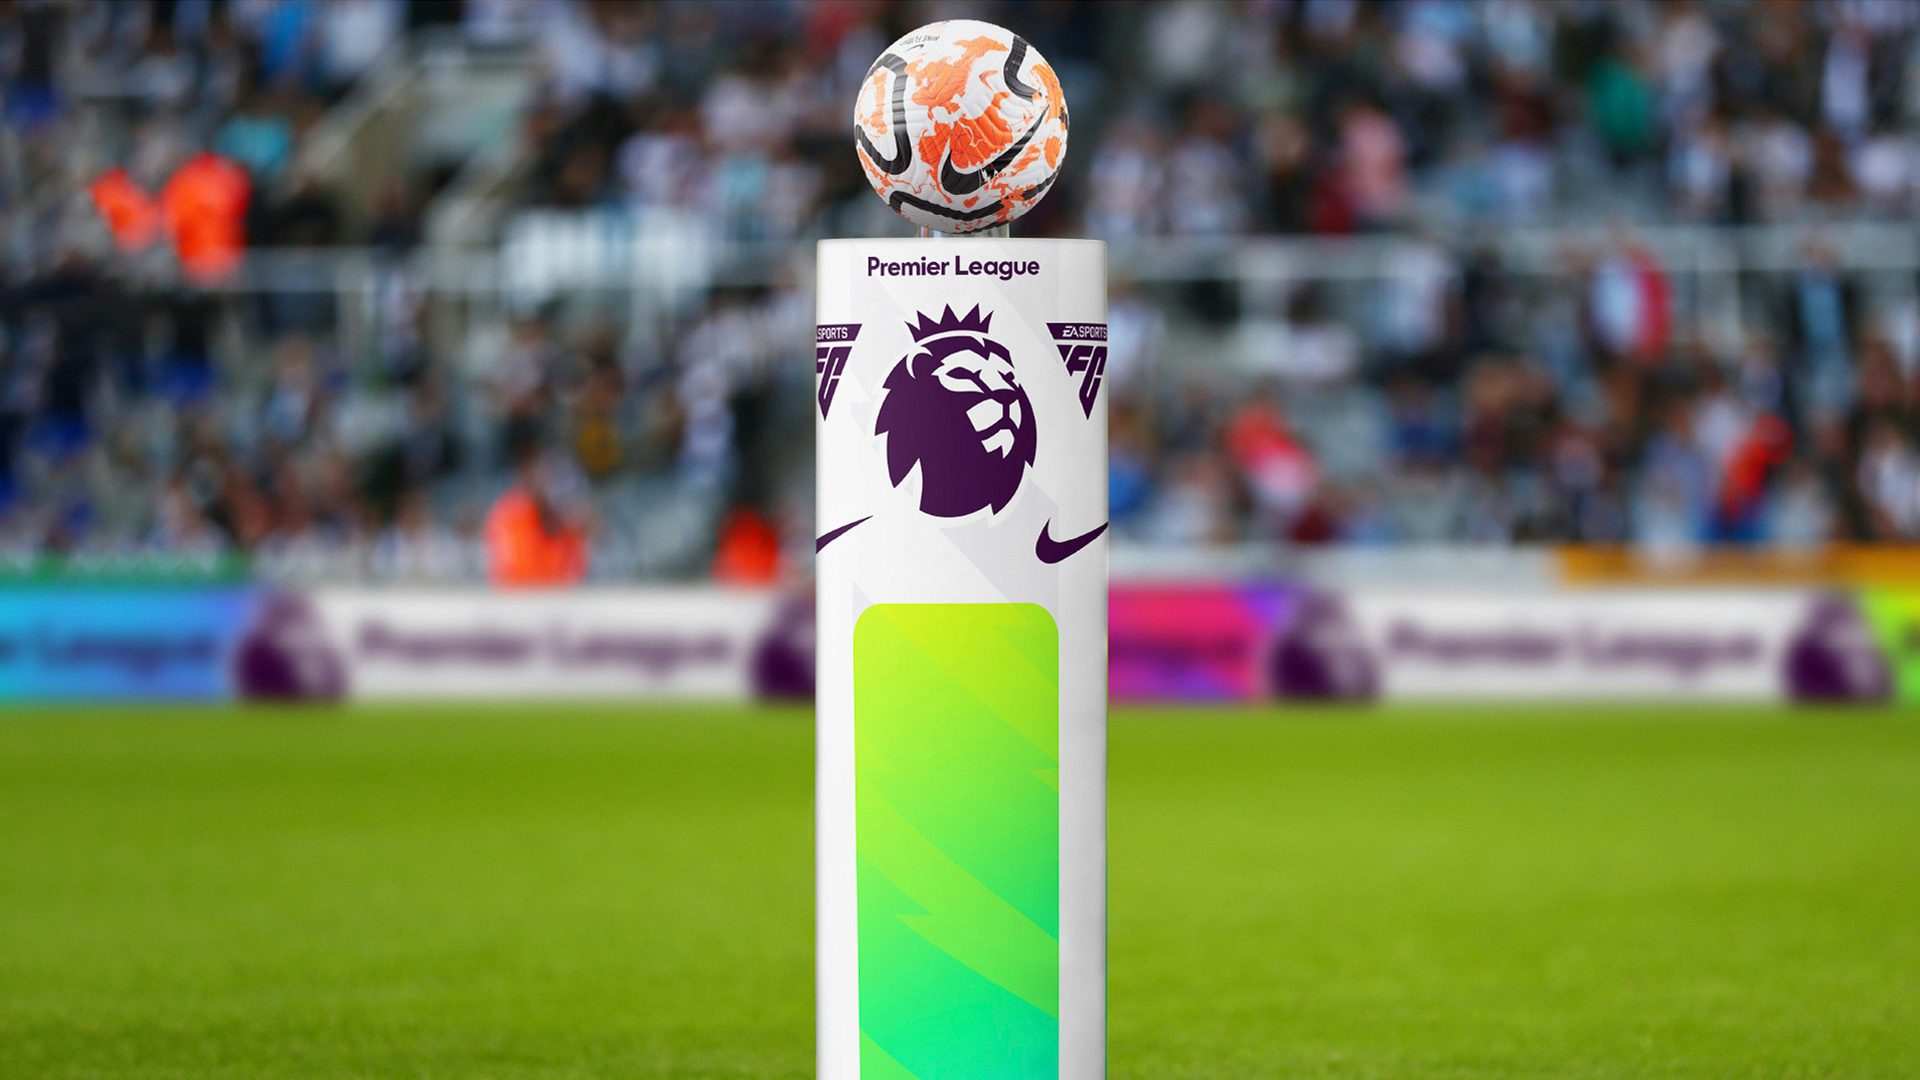 Photo from the Premier League brand refresh showing the league's purple lion icon on a podium with a white, orange and black Nike football on top